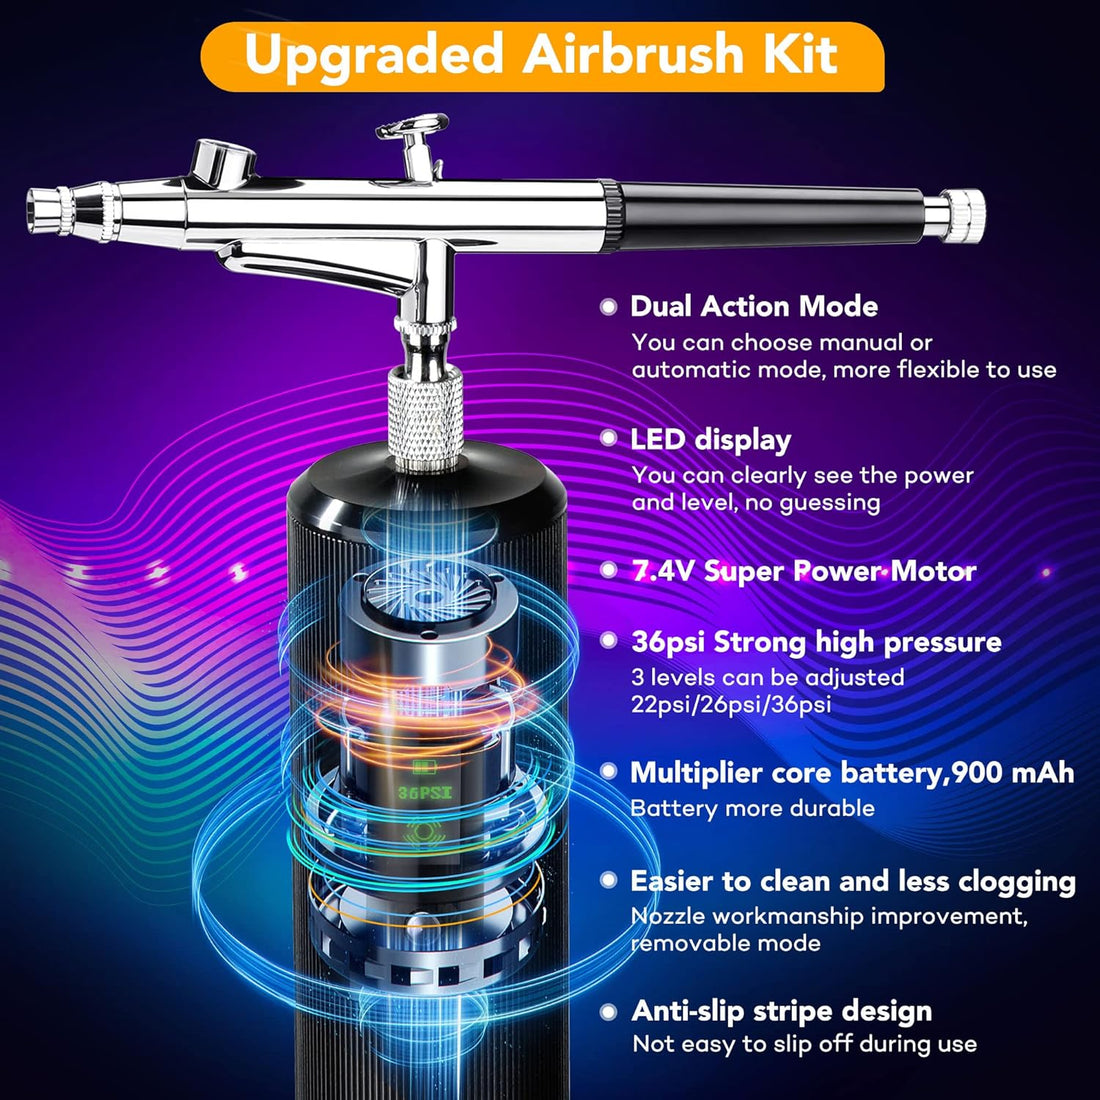 ANUINIT 36PSI LCD Screen Airbrush Kit with Compressor Dual-Action Mode Cordless Airbrush for Nails, Painting, Makeup, Cake, Artwork Coloring, Portable Rechargeable Anti-Slip Airbrush Upgraded